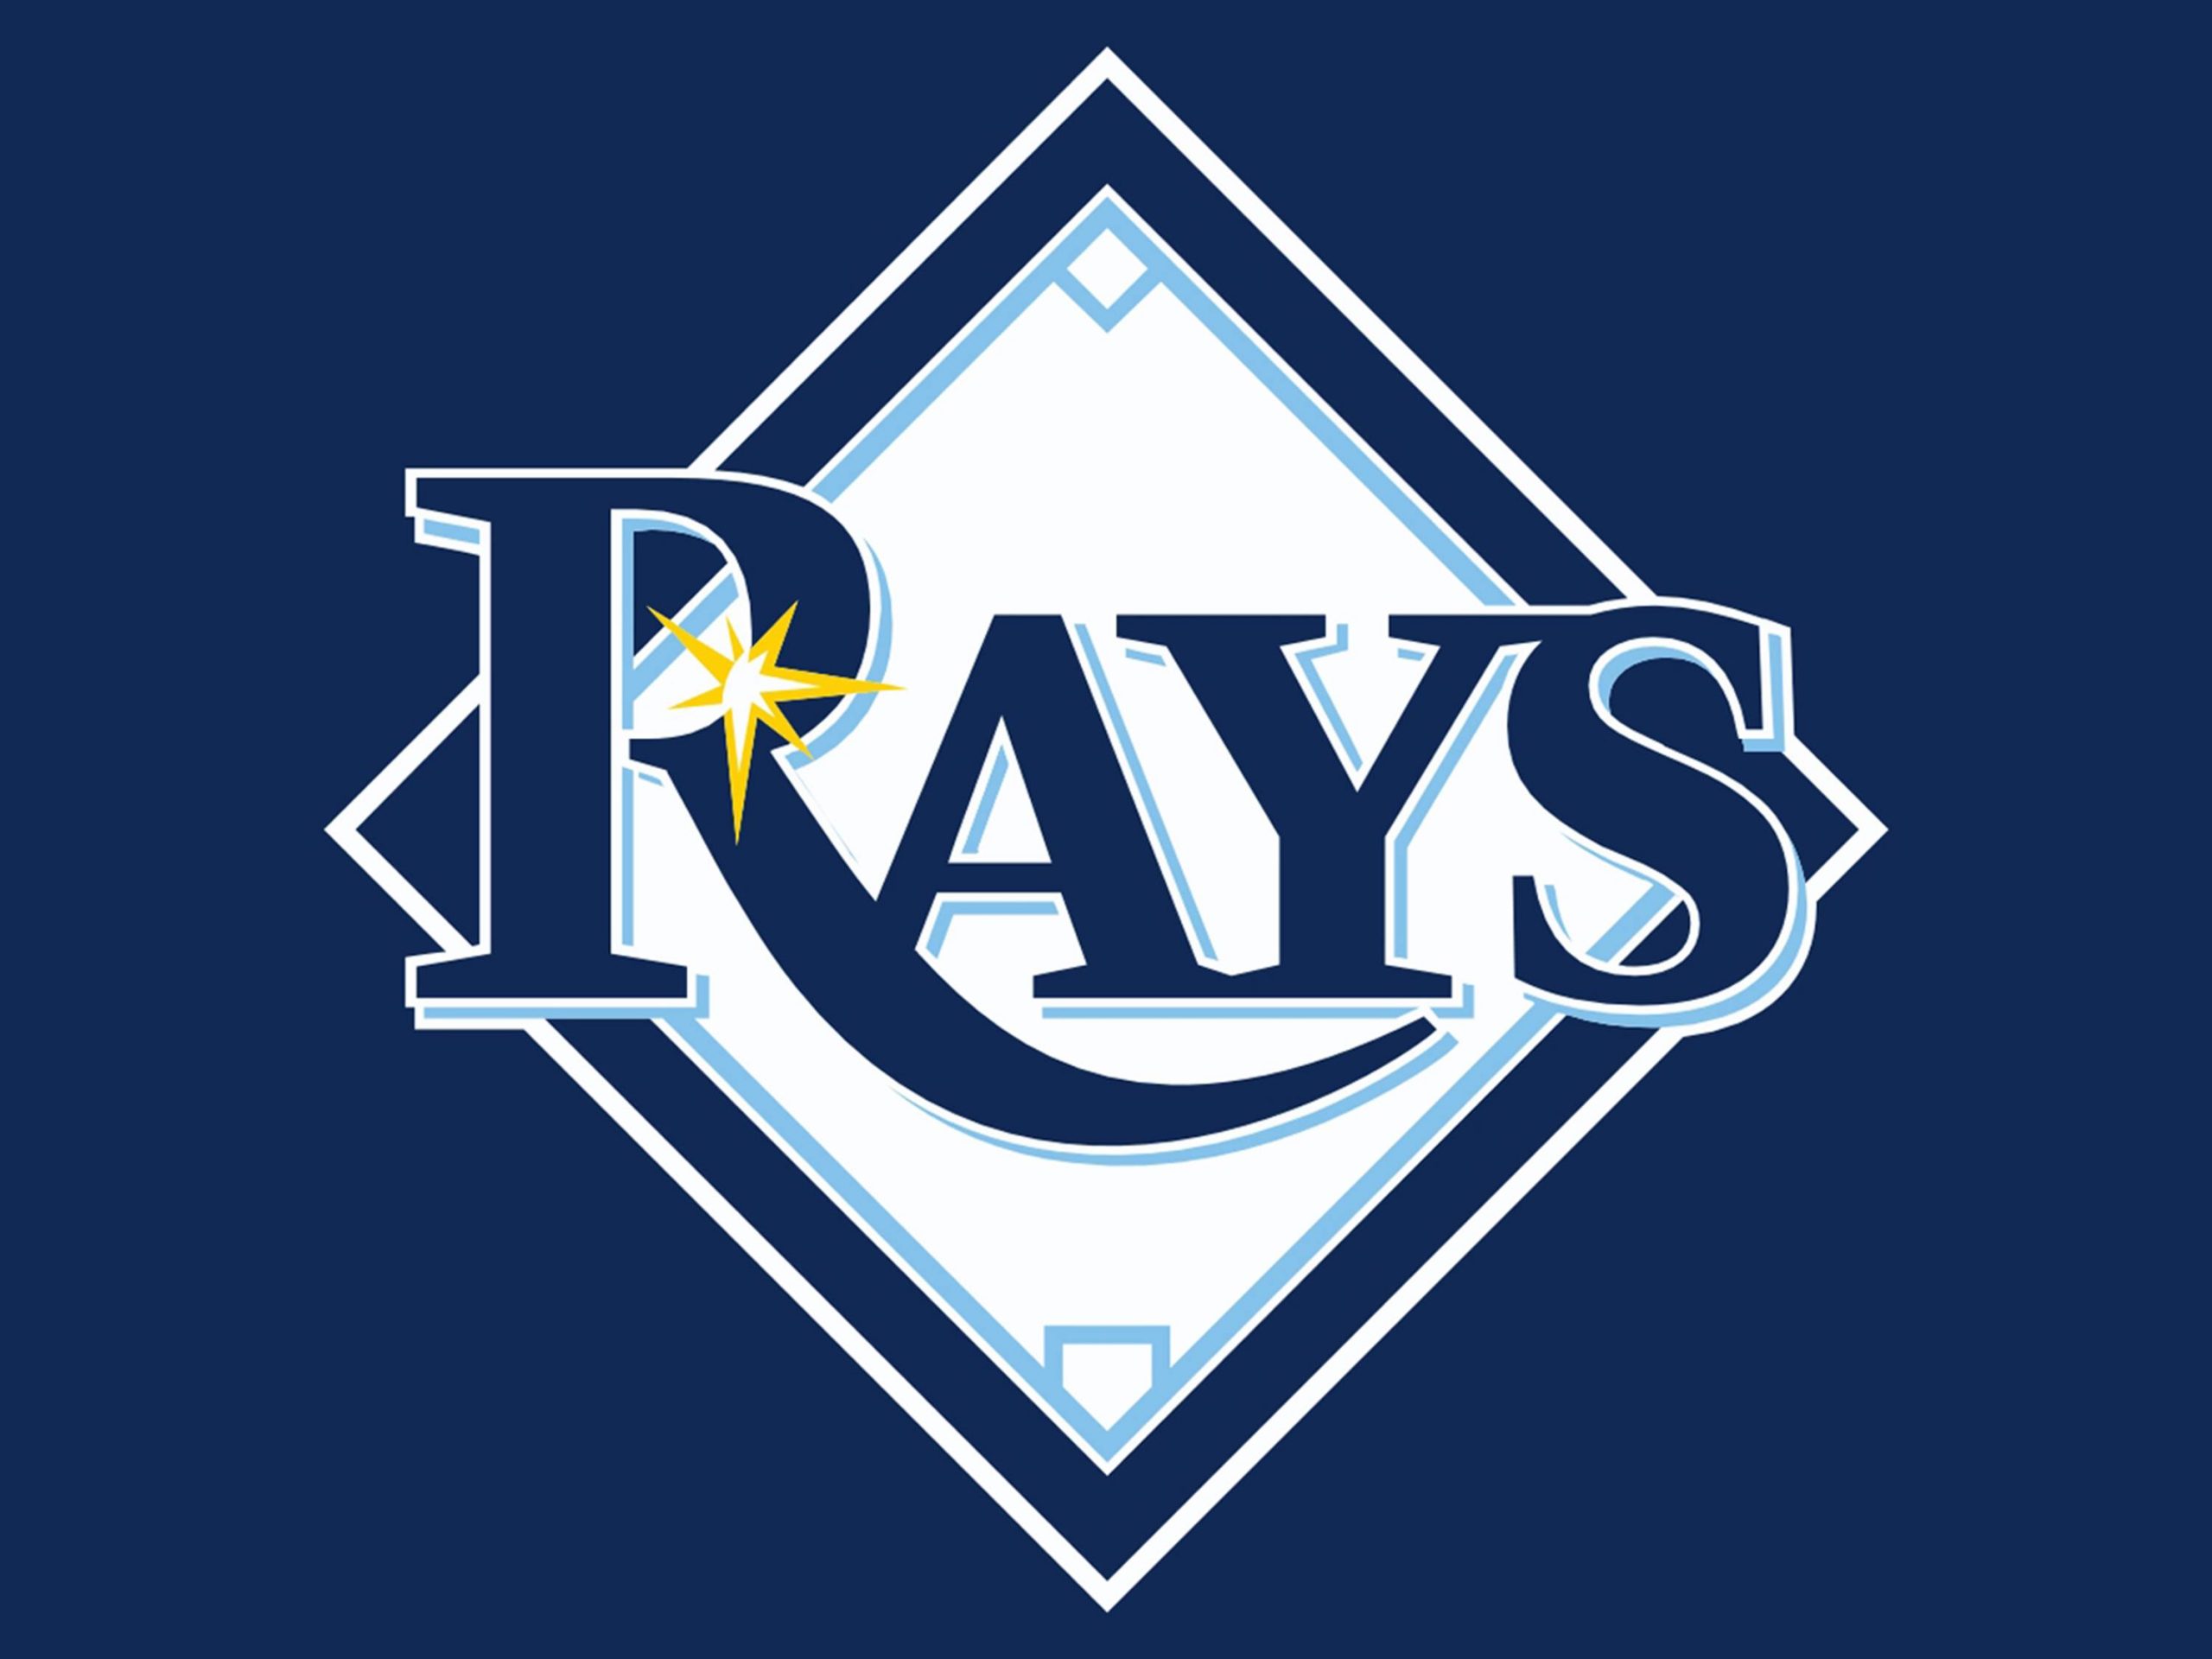 Complete Tampa Bay Rays MLB schedule for the 2021 season